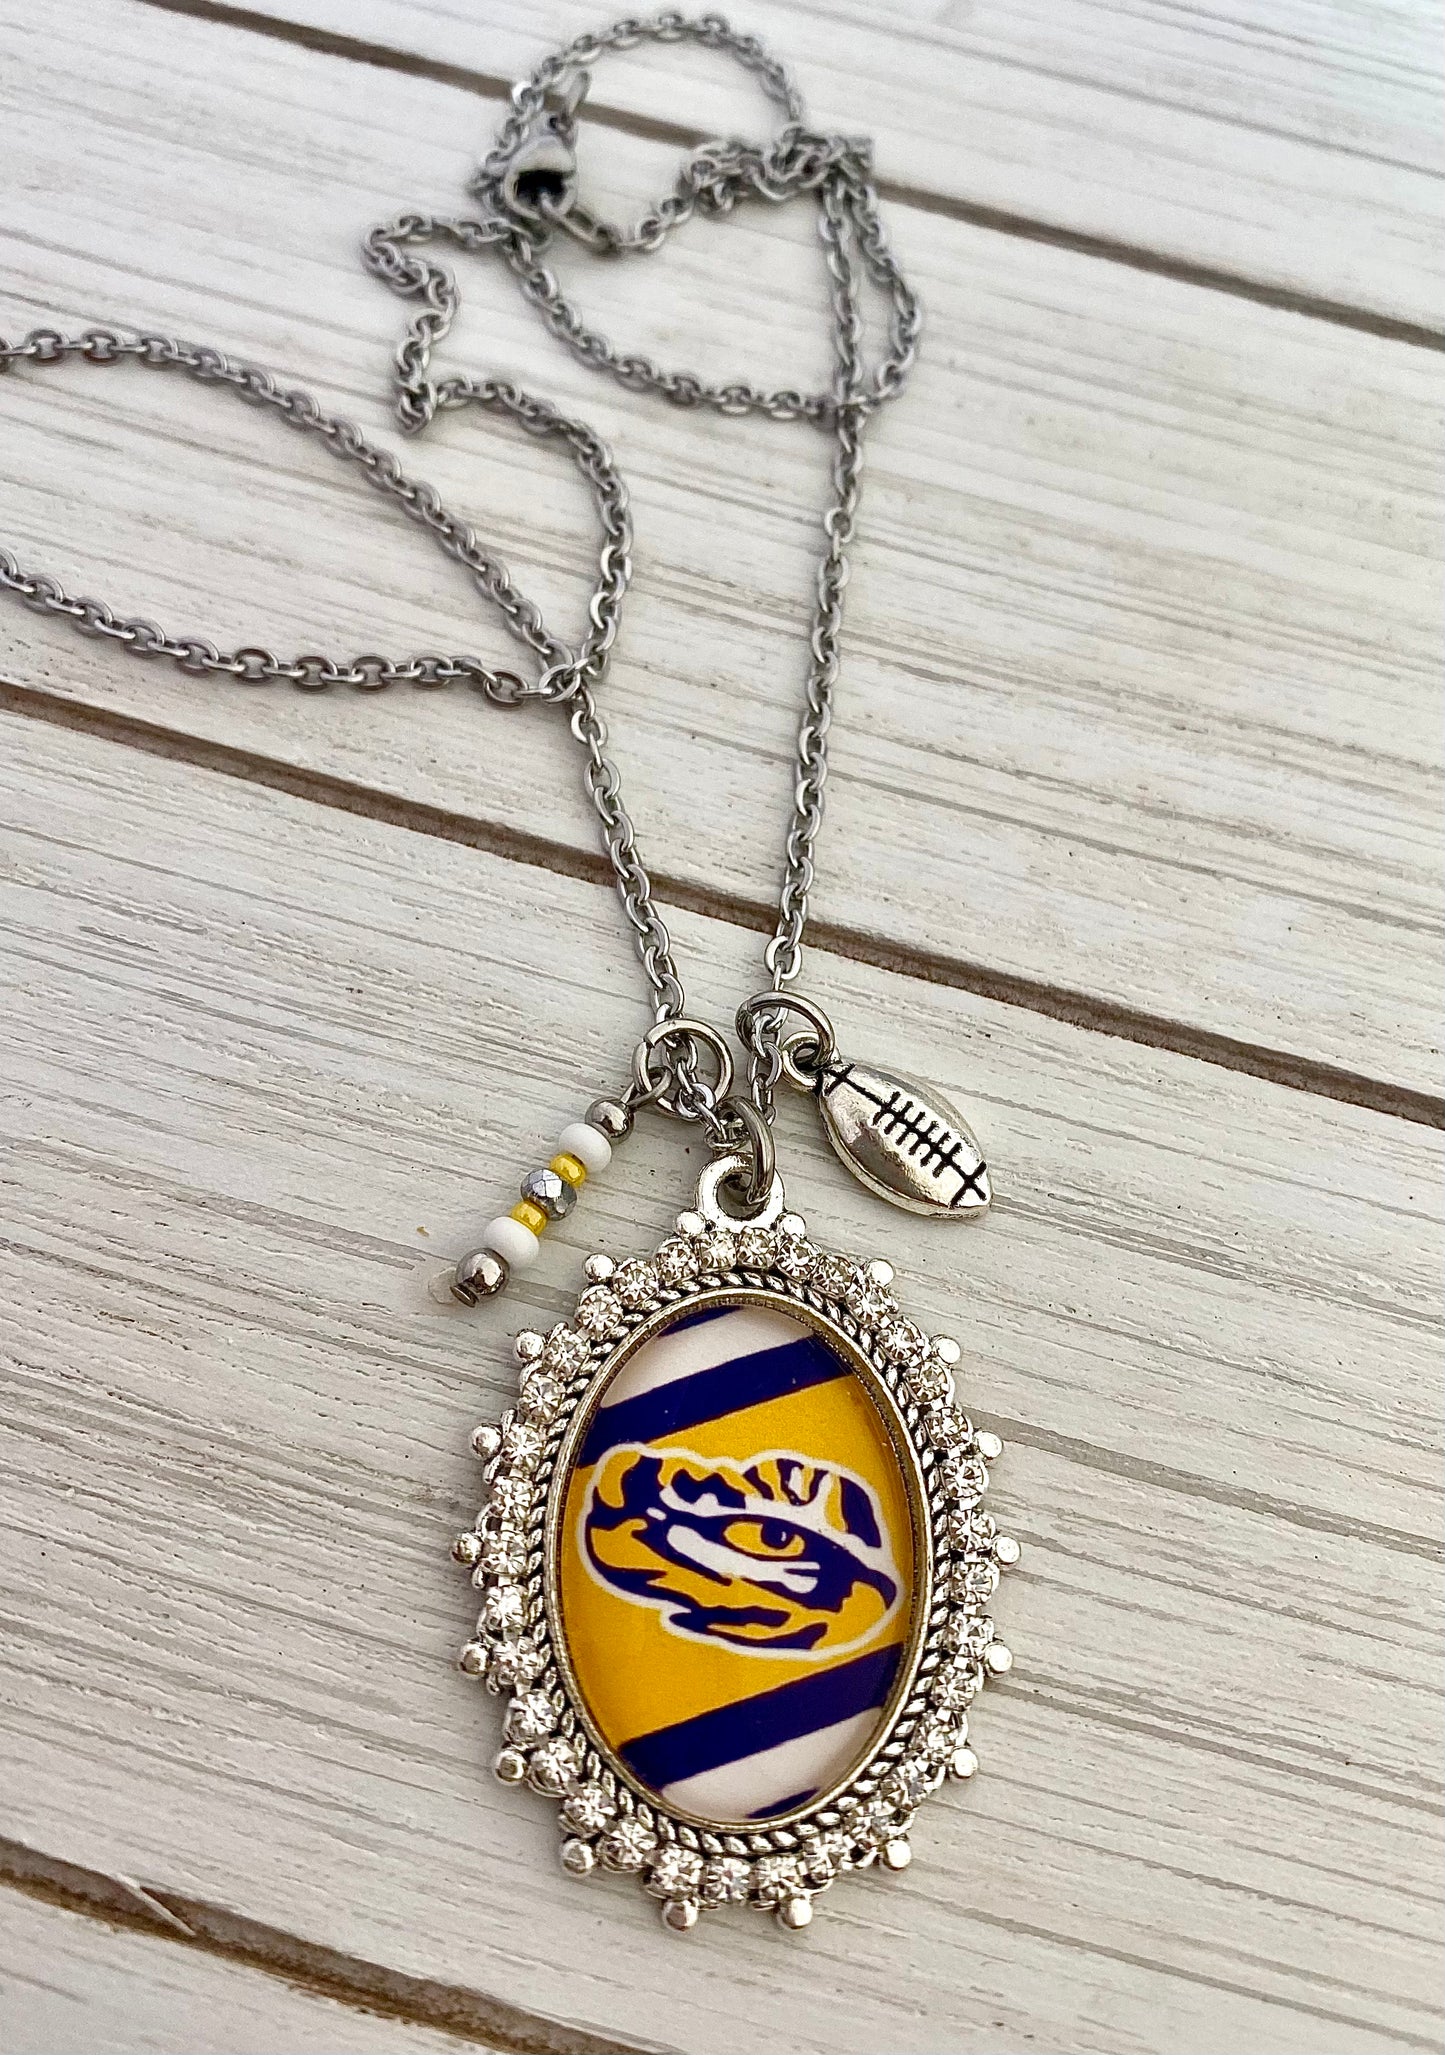 School Spirit Bling Necklace (Customized with your school)